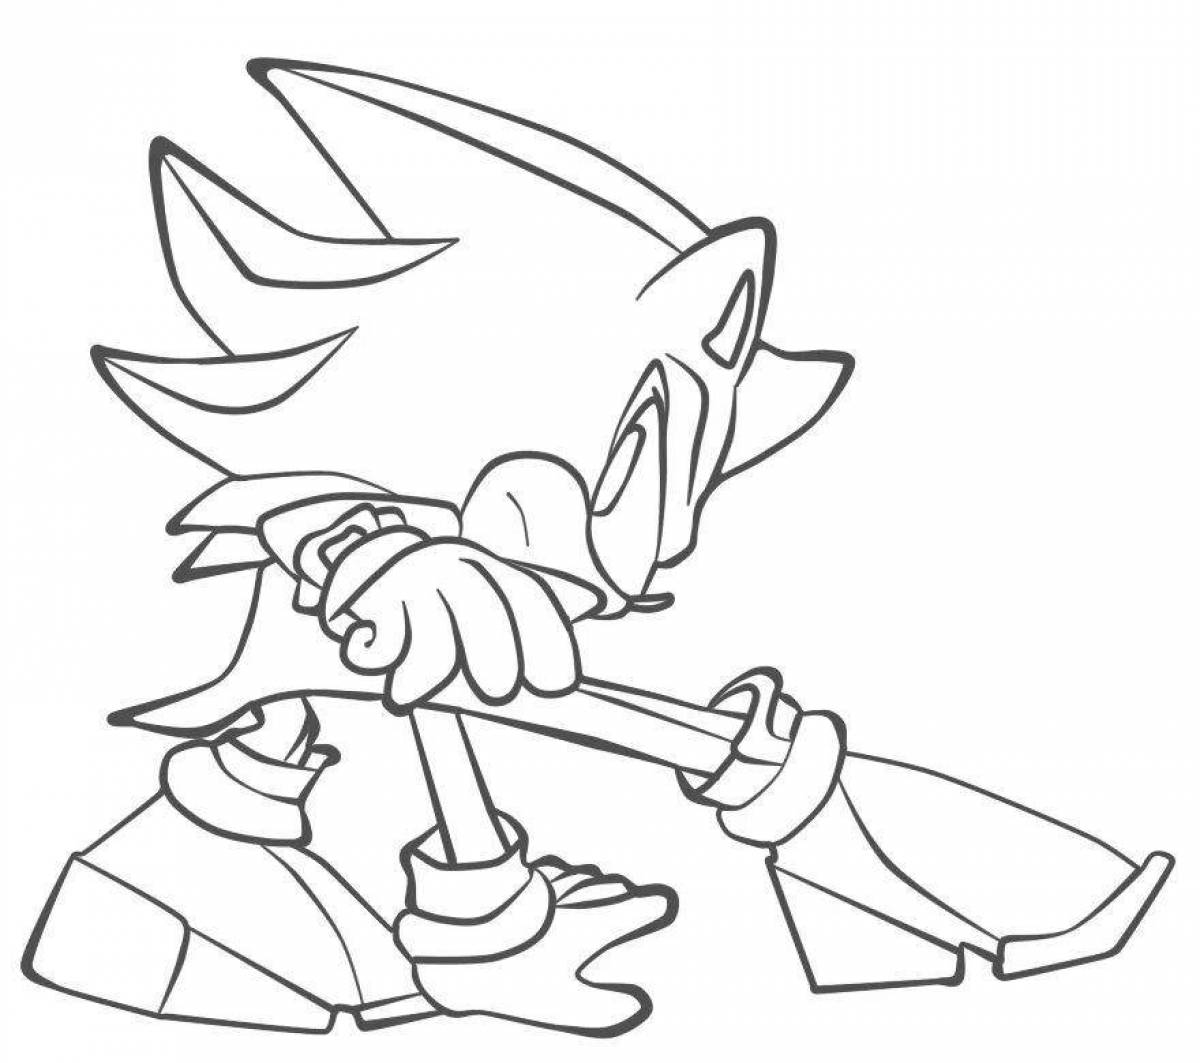 Great shadow hedgehog coloring page